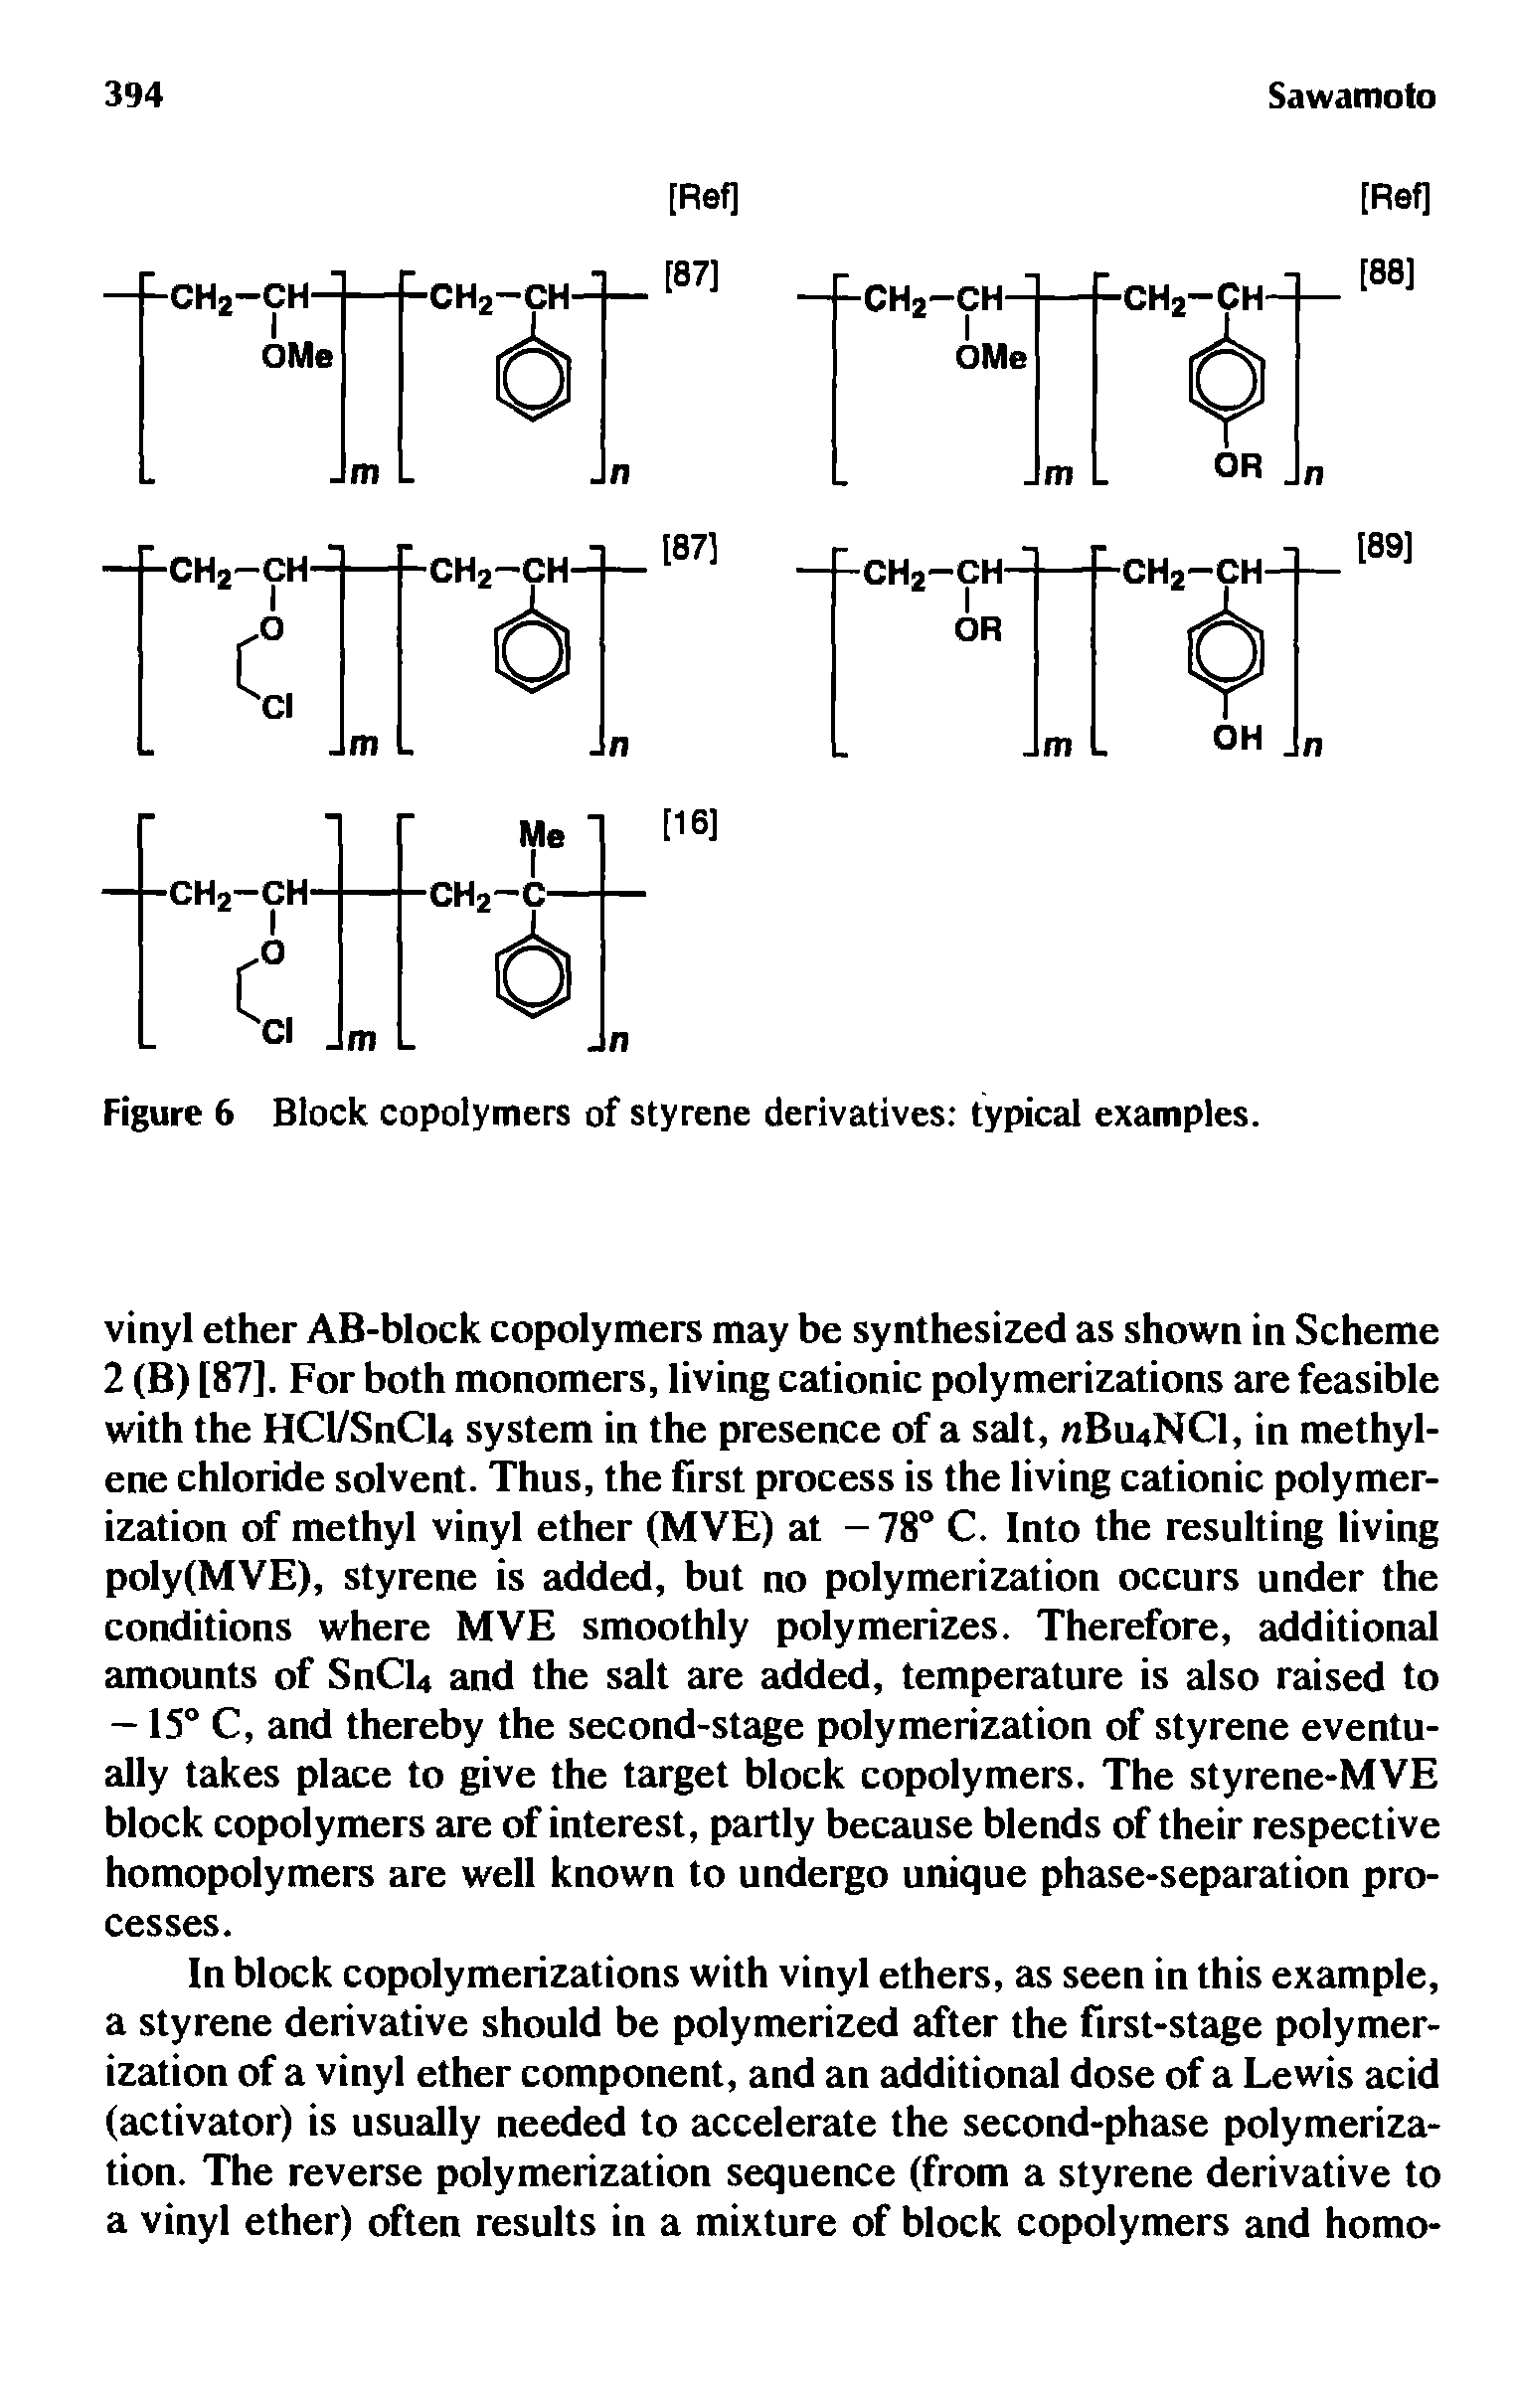 Figure 6 Block copolymers of styrene derivatives typical examples.